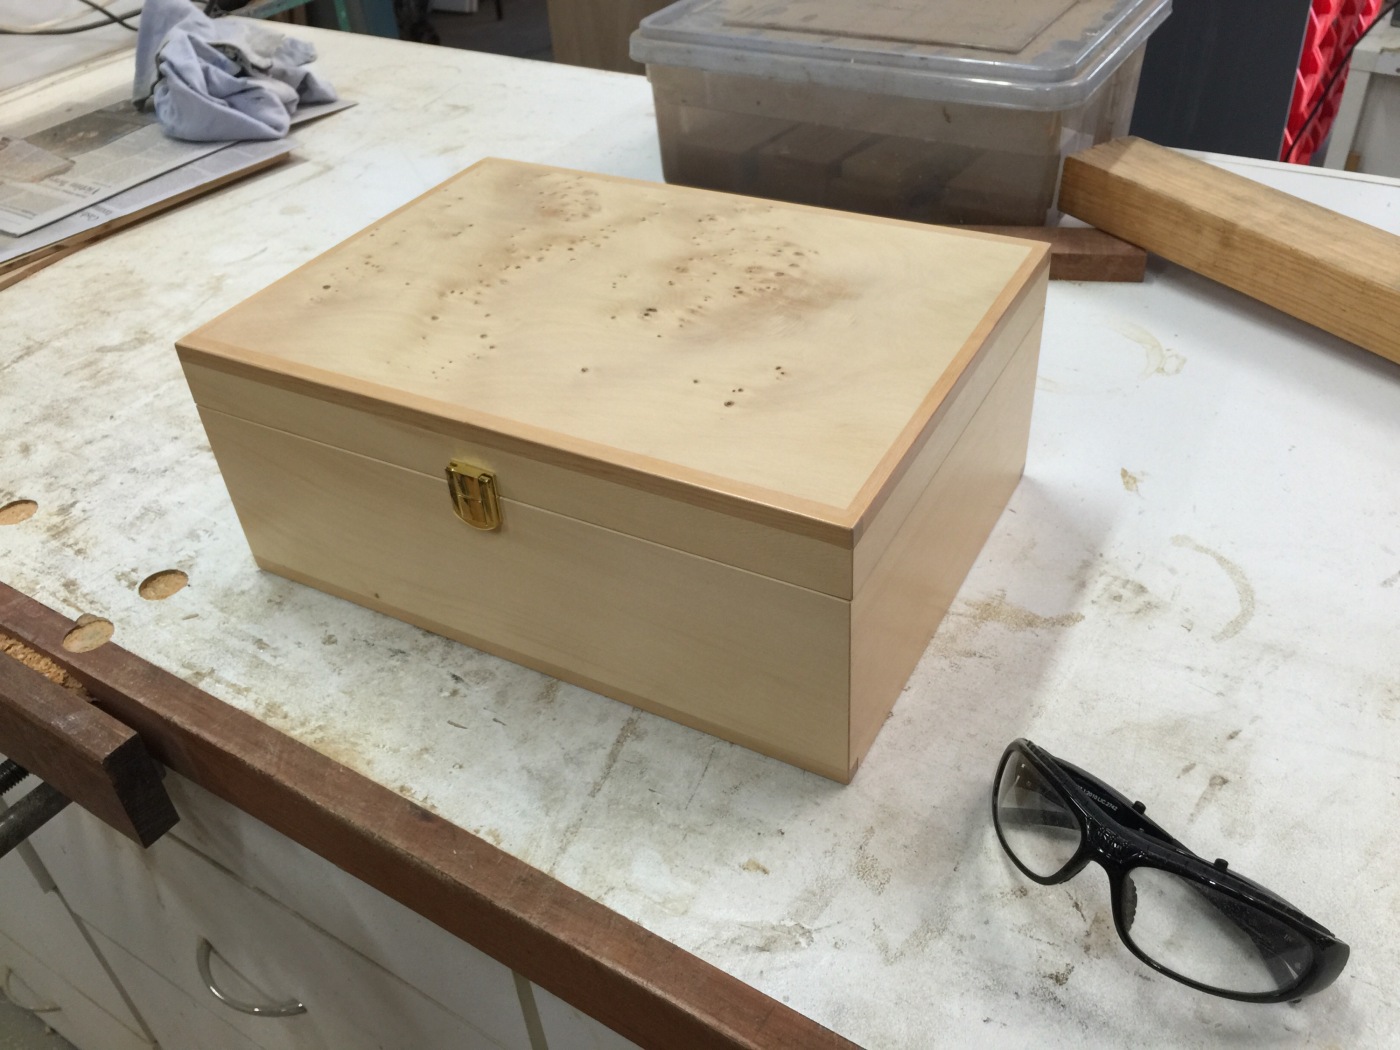 Document box almost complete